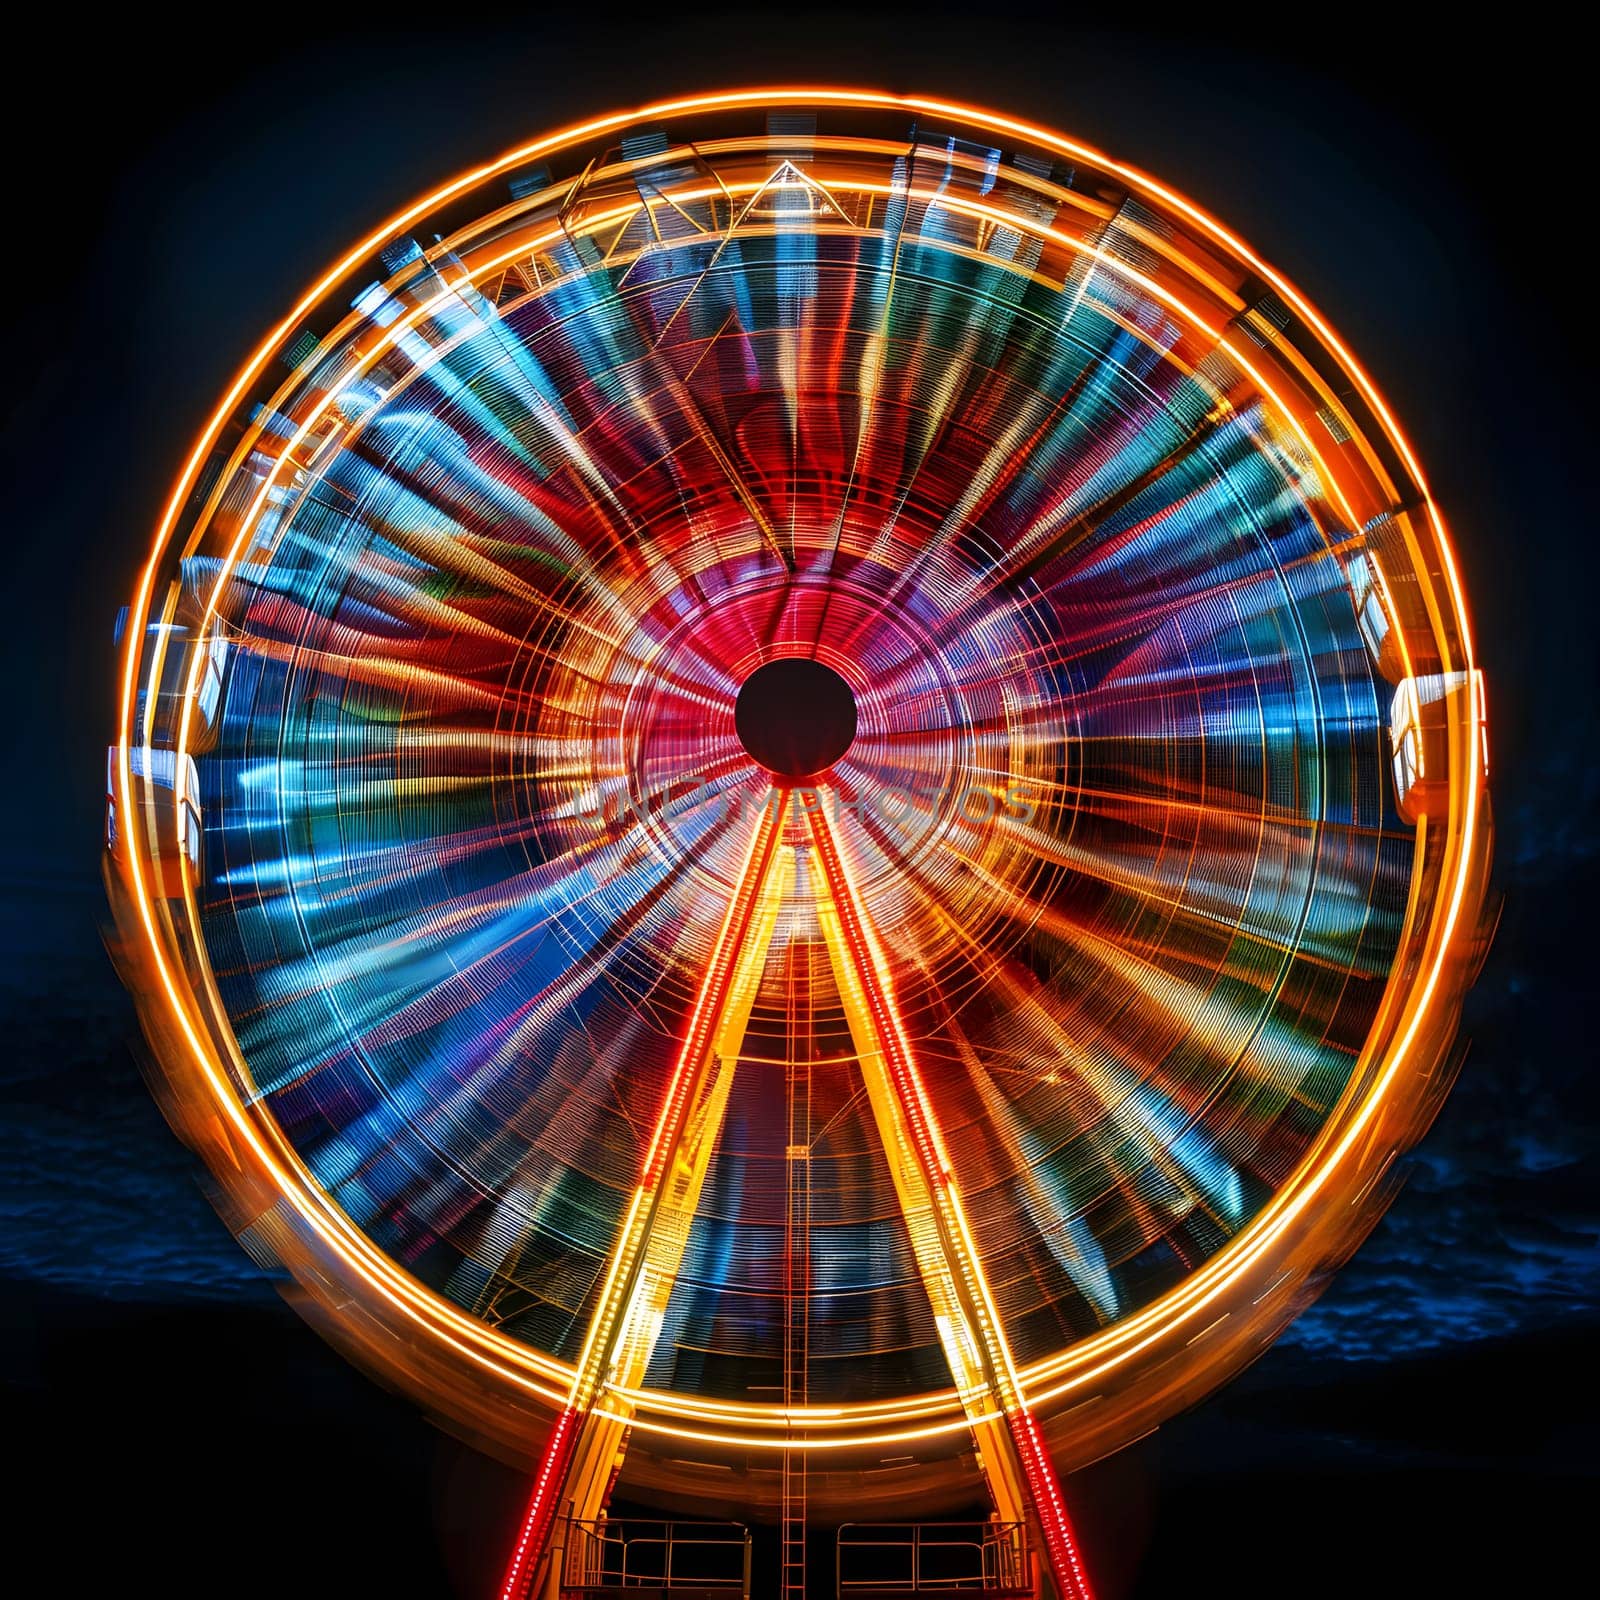 The electric blue Ferris wheel shines brightly in the darkness, captivating the eye with its symmetrical circle of lights. A dazzling recreation attraction at the event